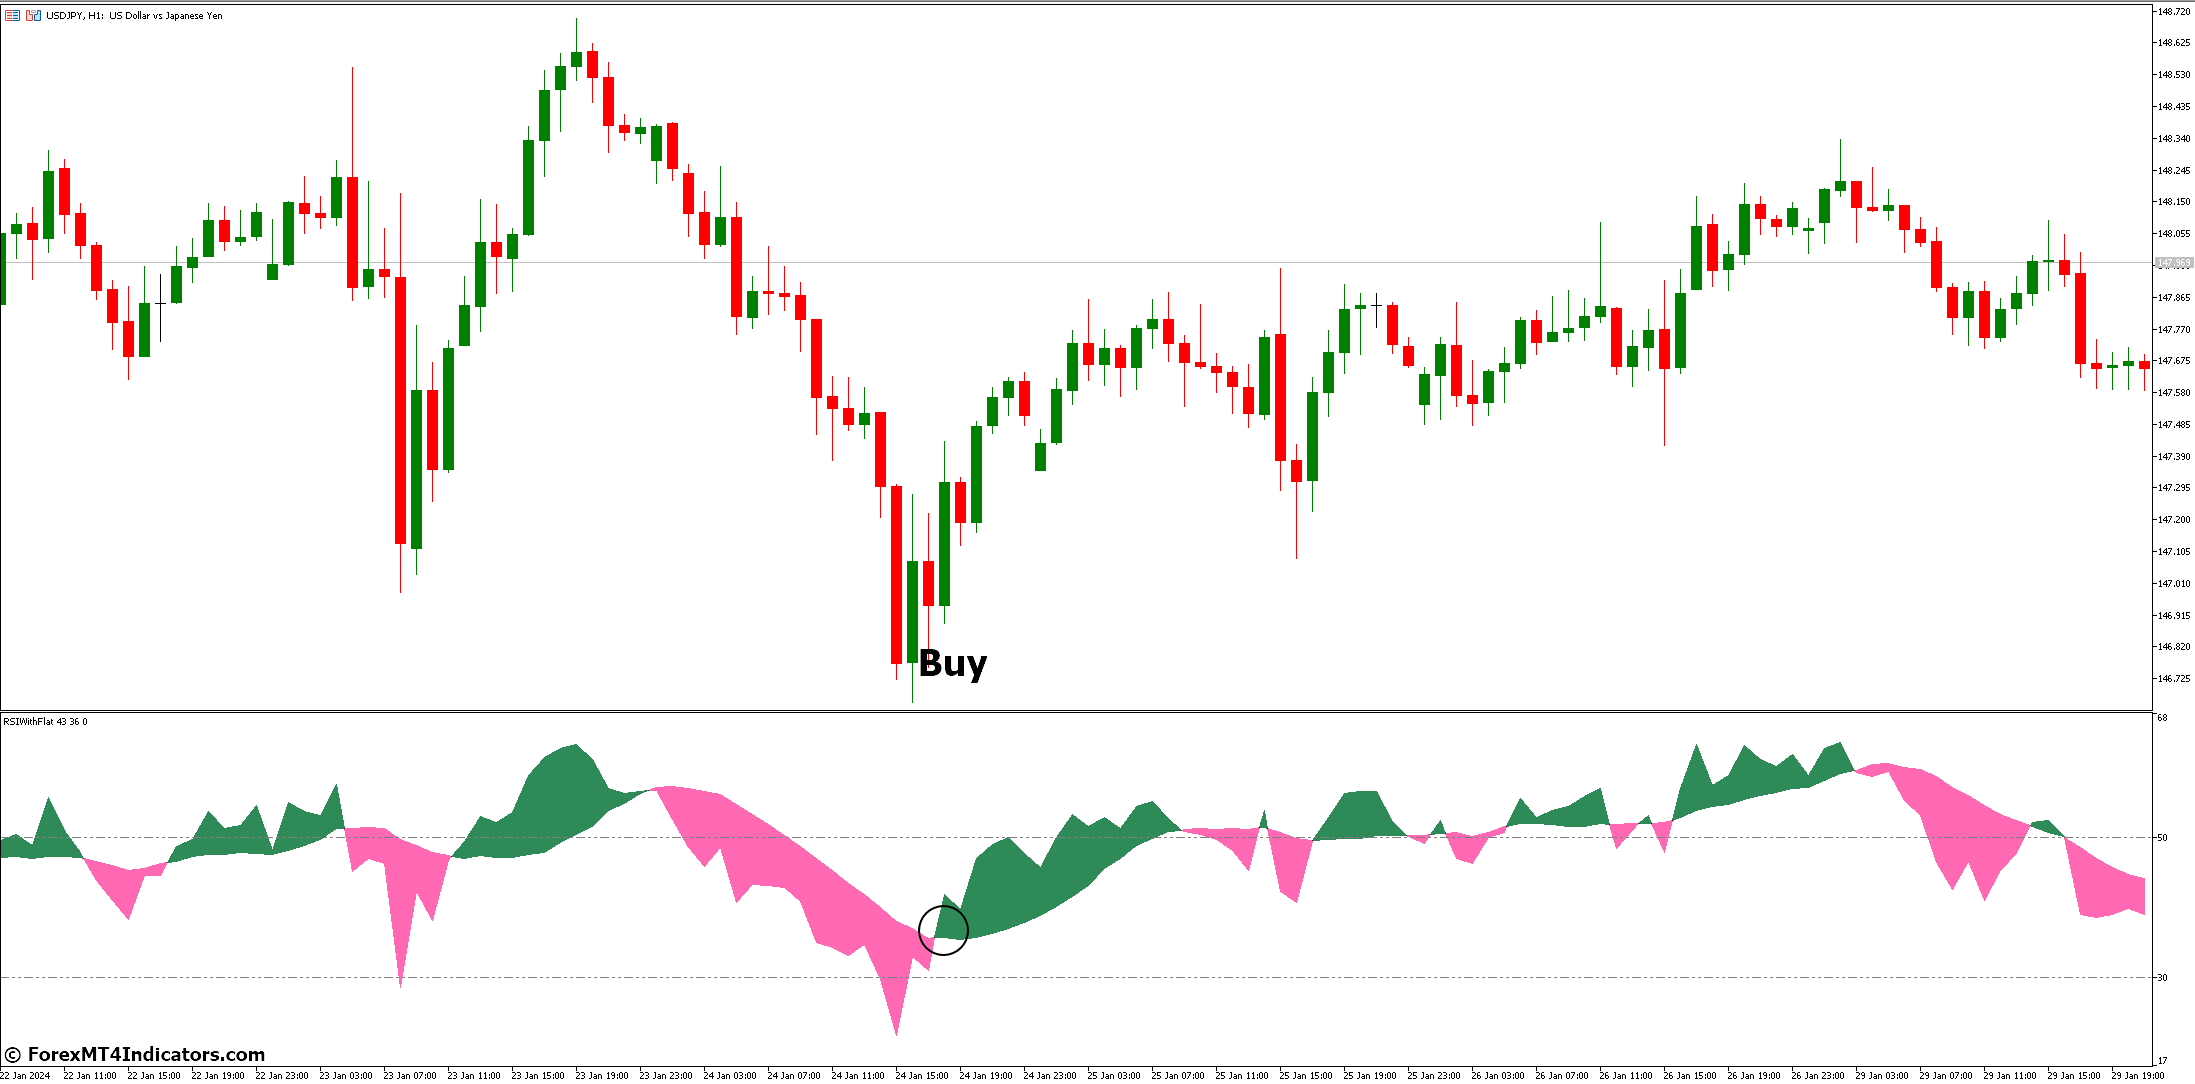 How to Trade with RSI with Flat Indicator - Buy Entry